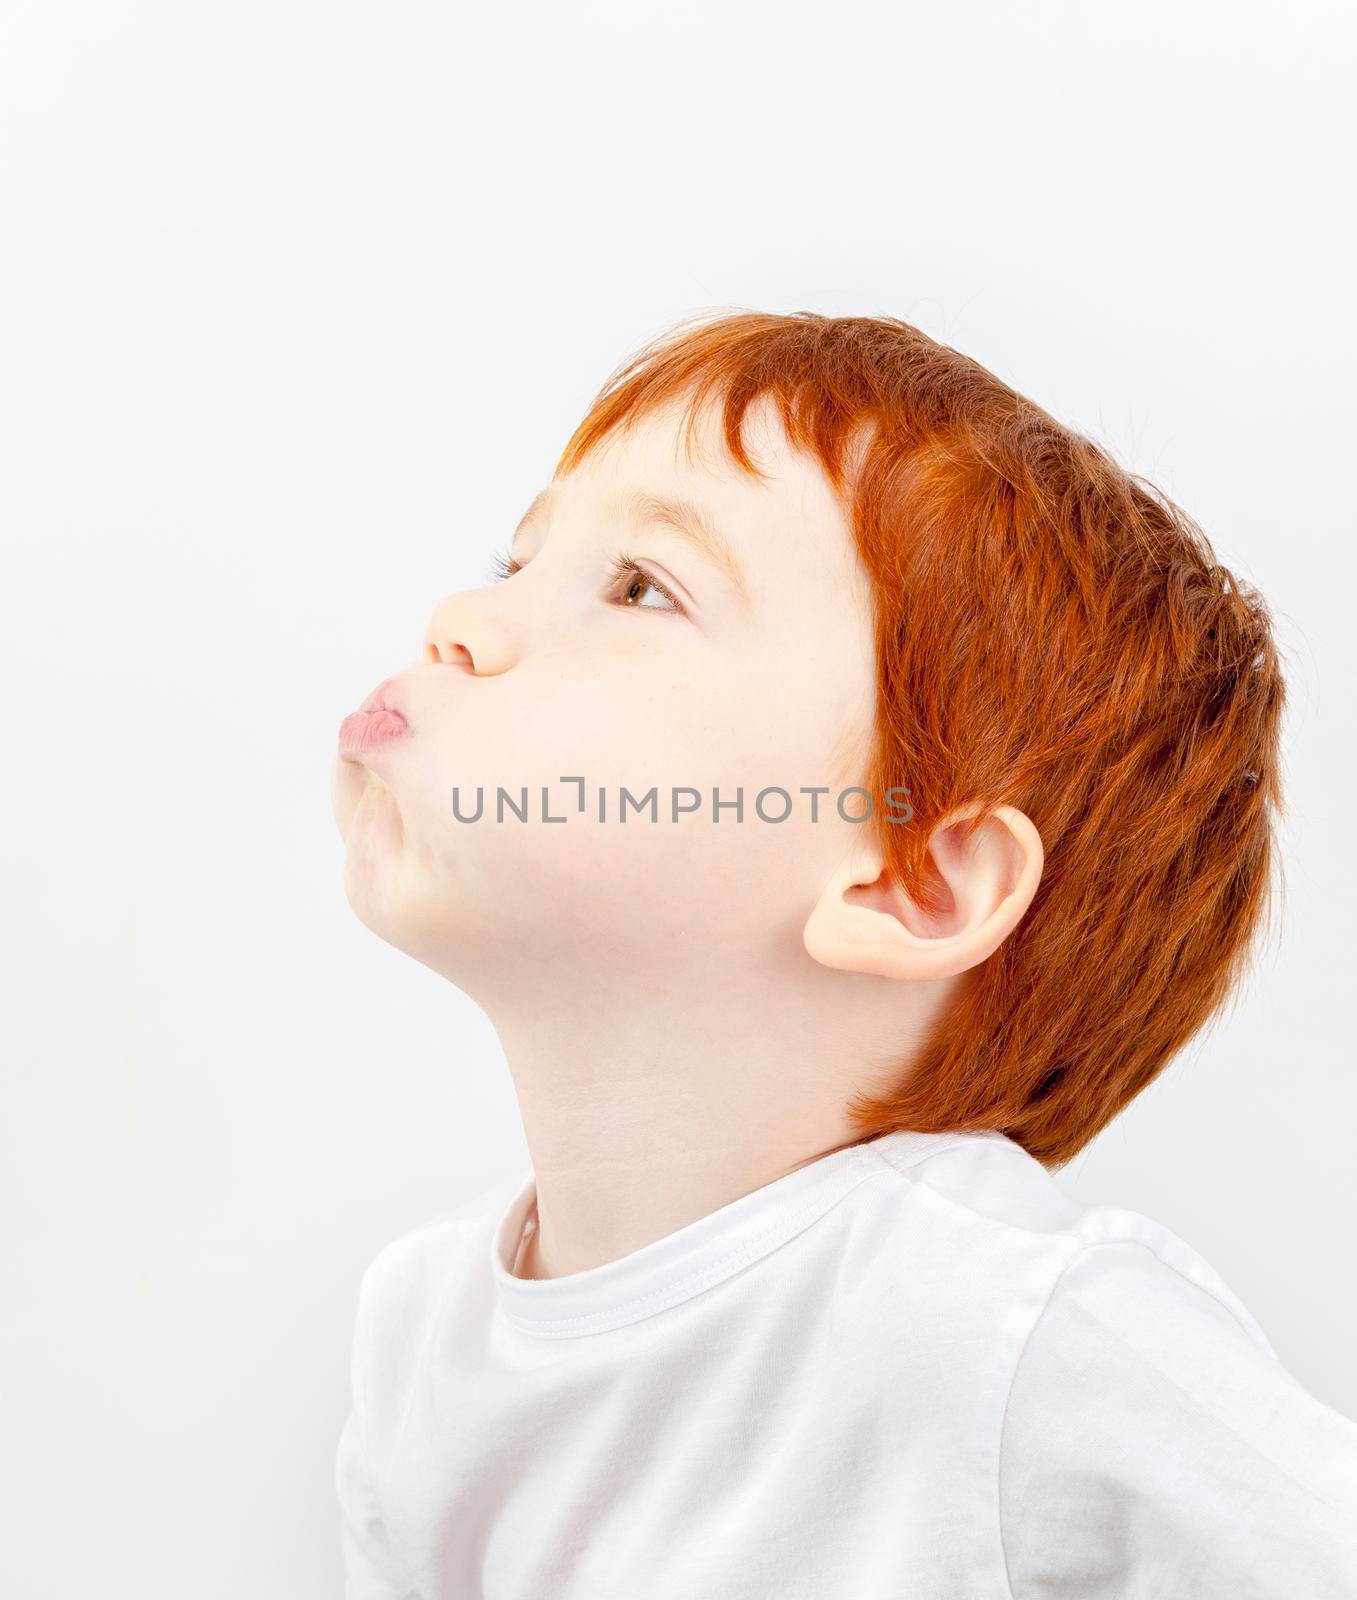 red-haired boy puffed out his cheeks and looks away, closeup